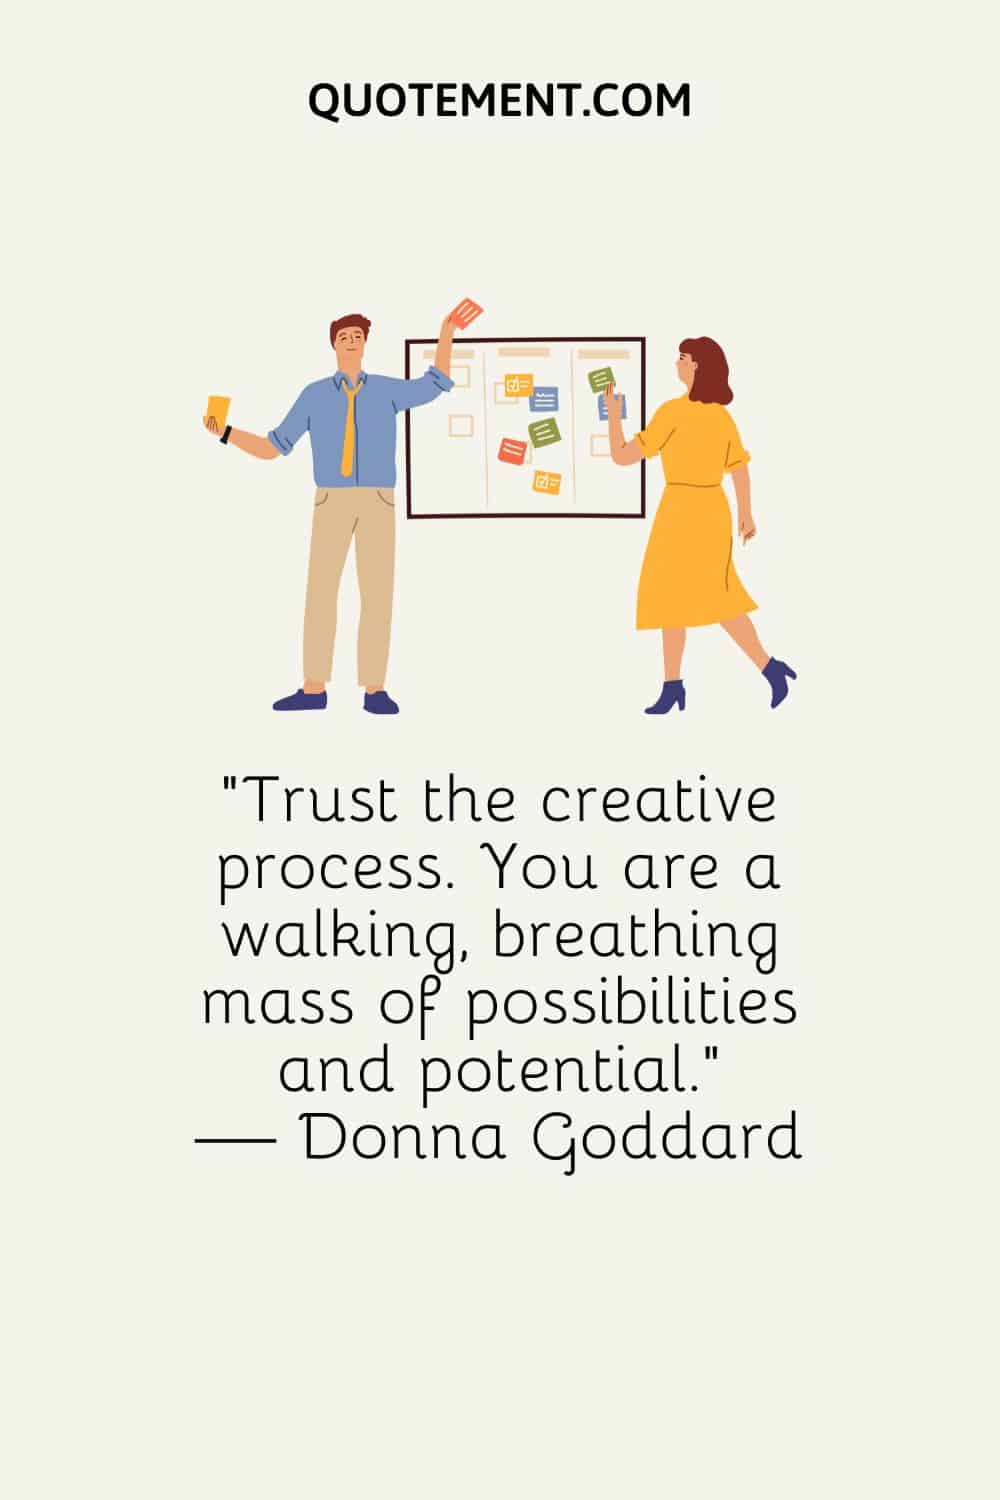 Trust the creative process. You are a walking, breathing mass of possibilities and potential